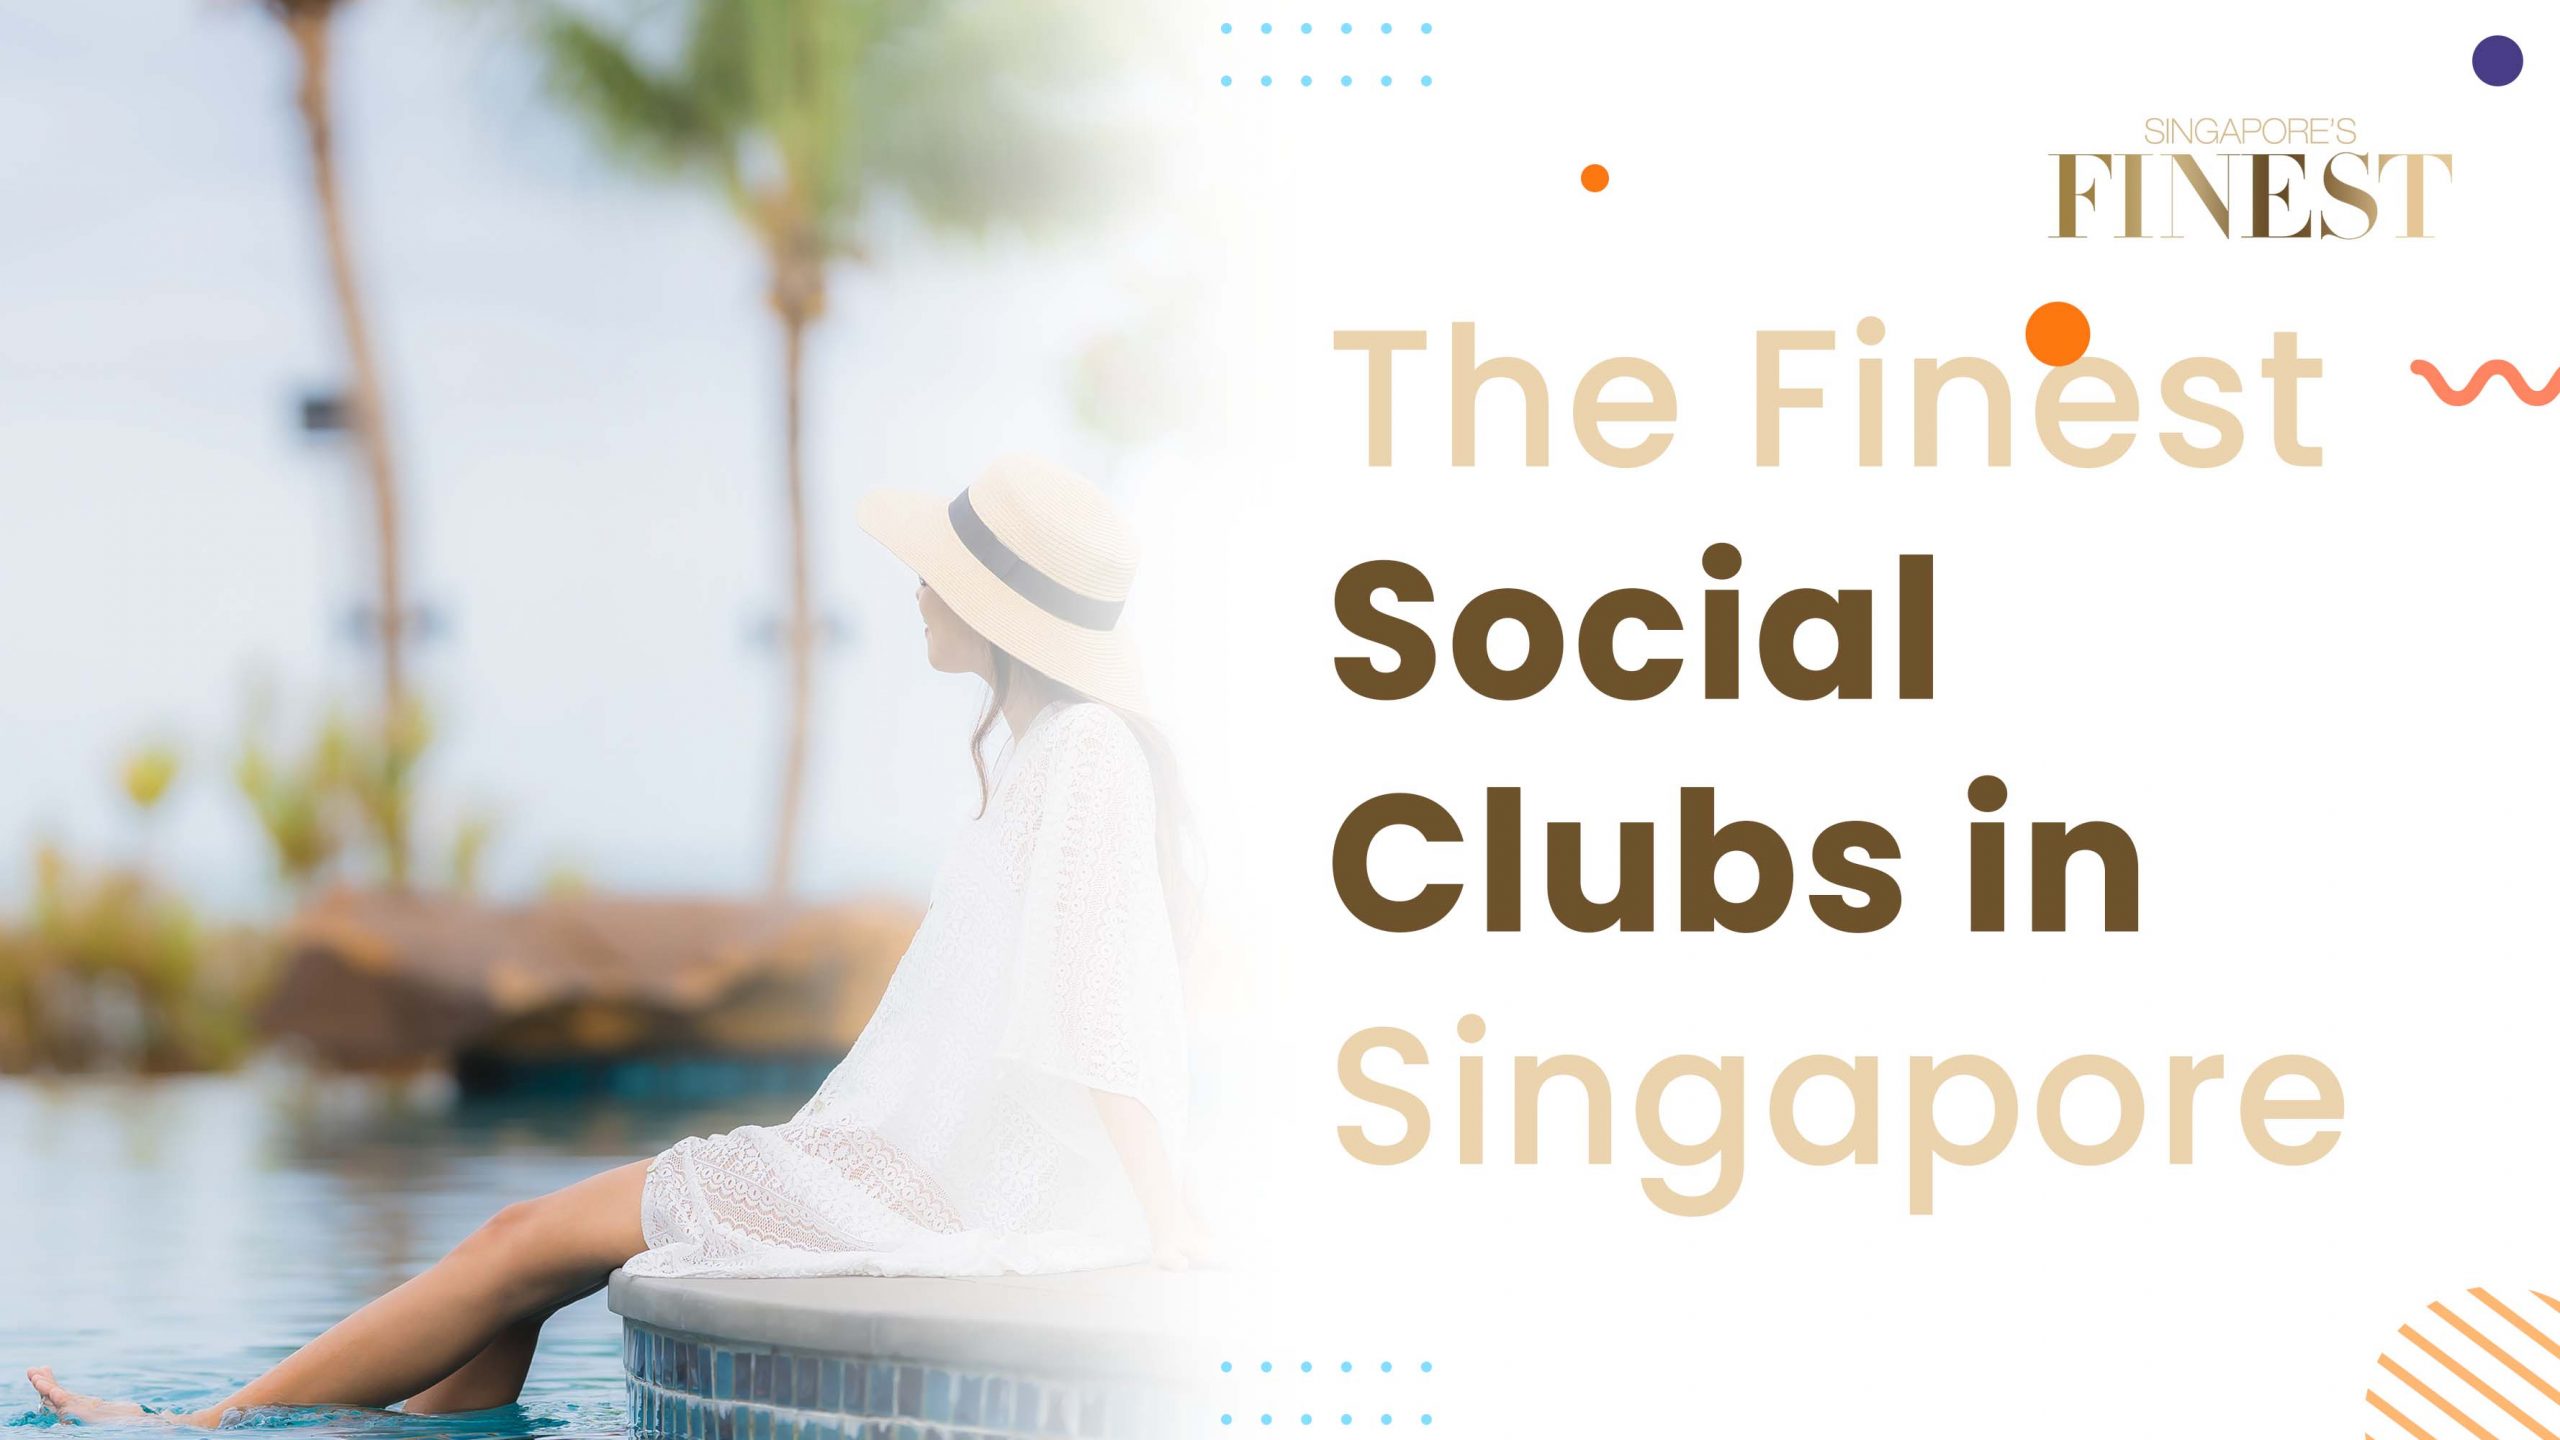 The Finest Social Clubs in Singapore